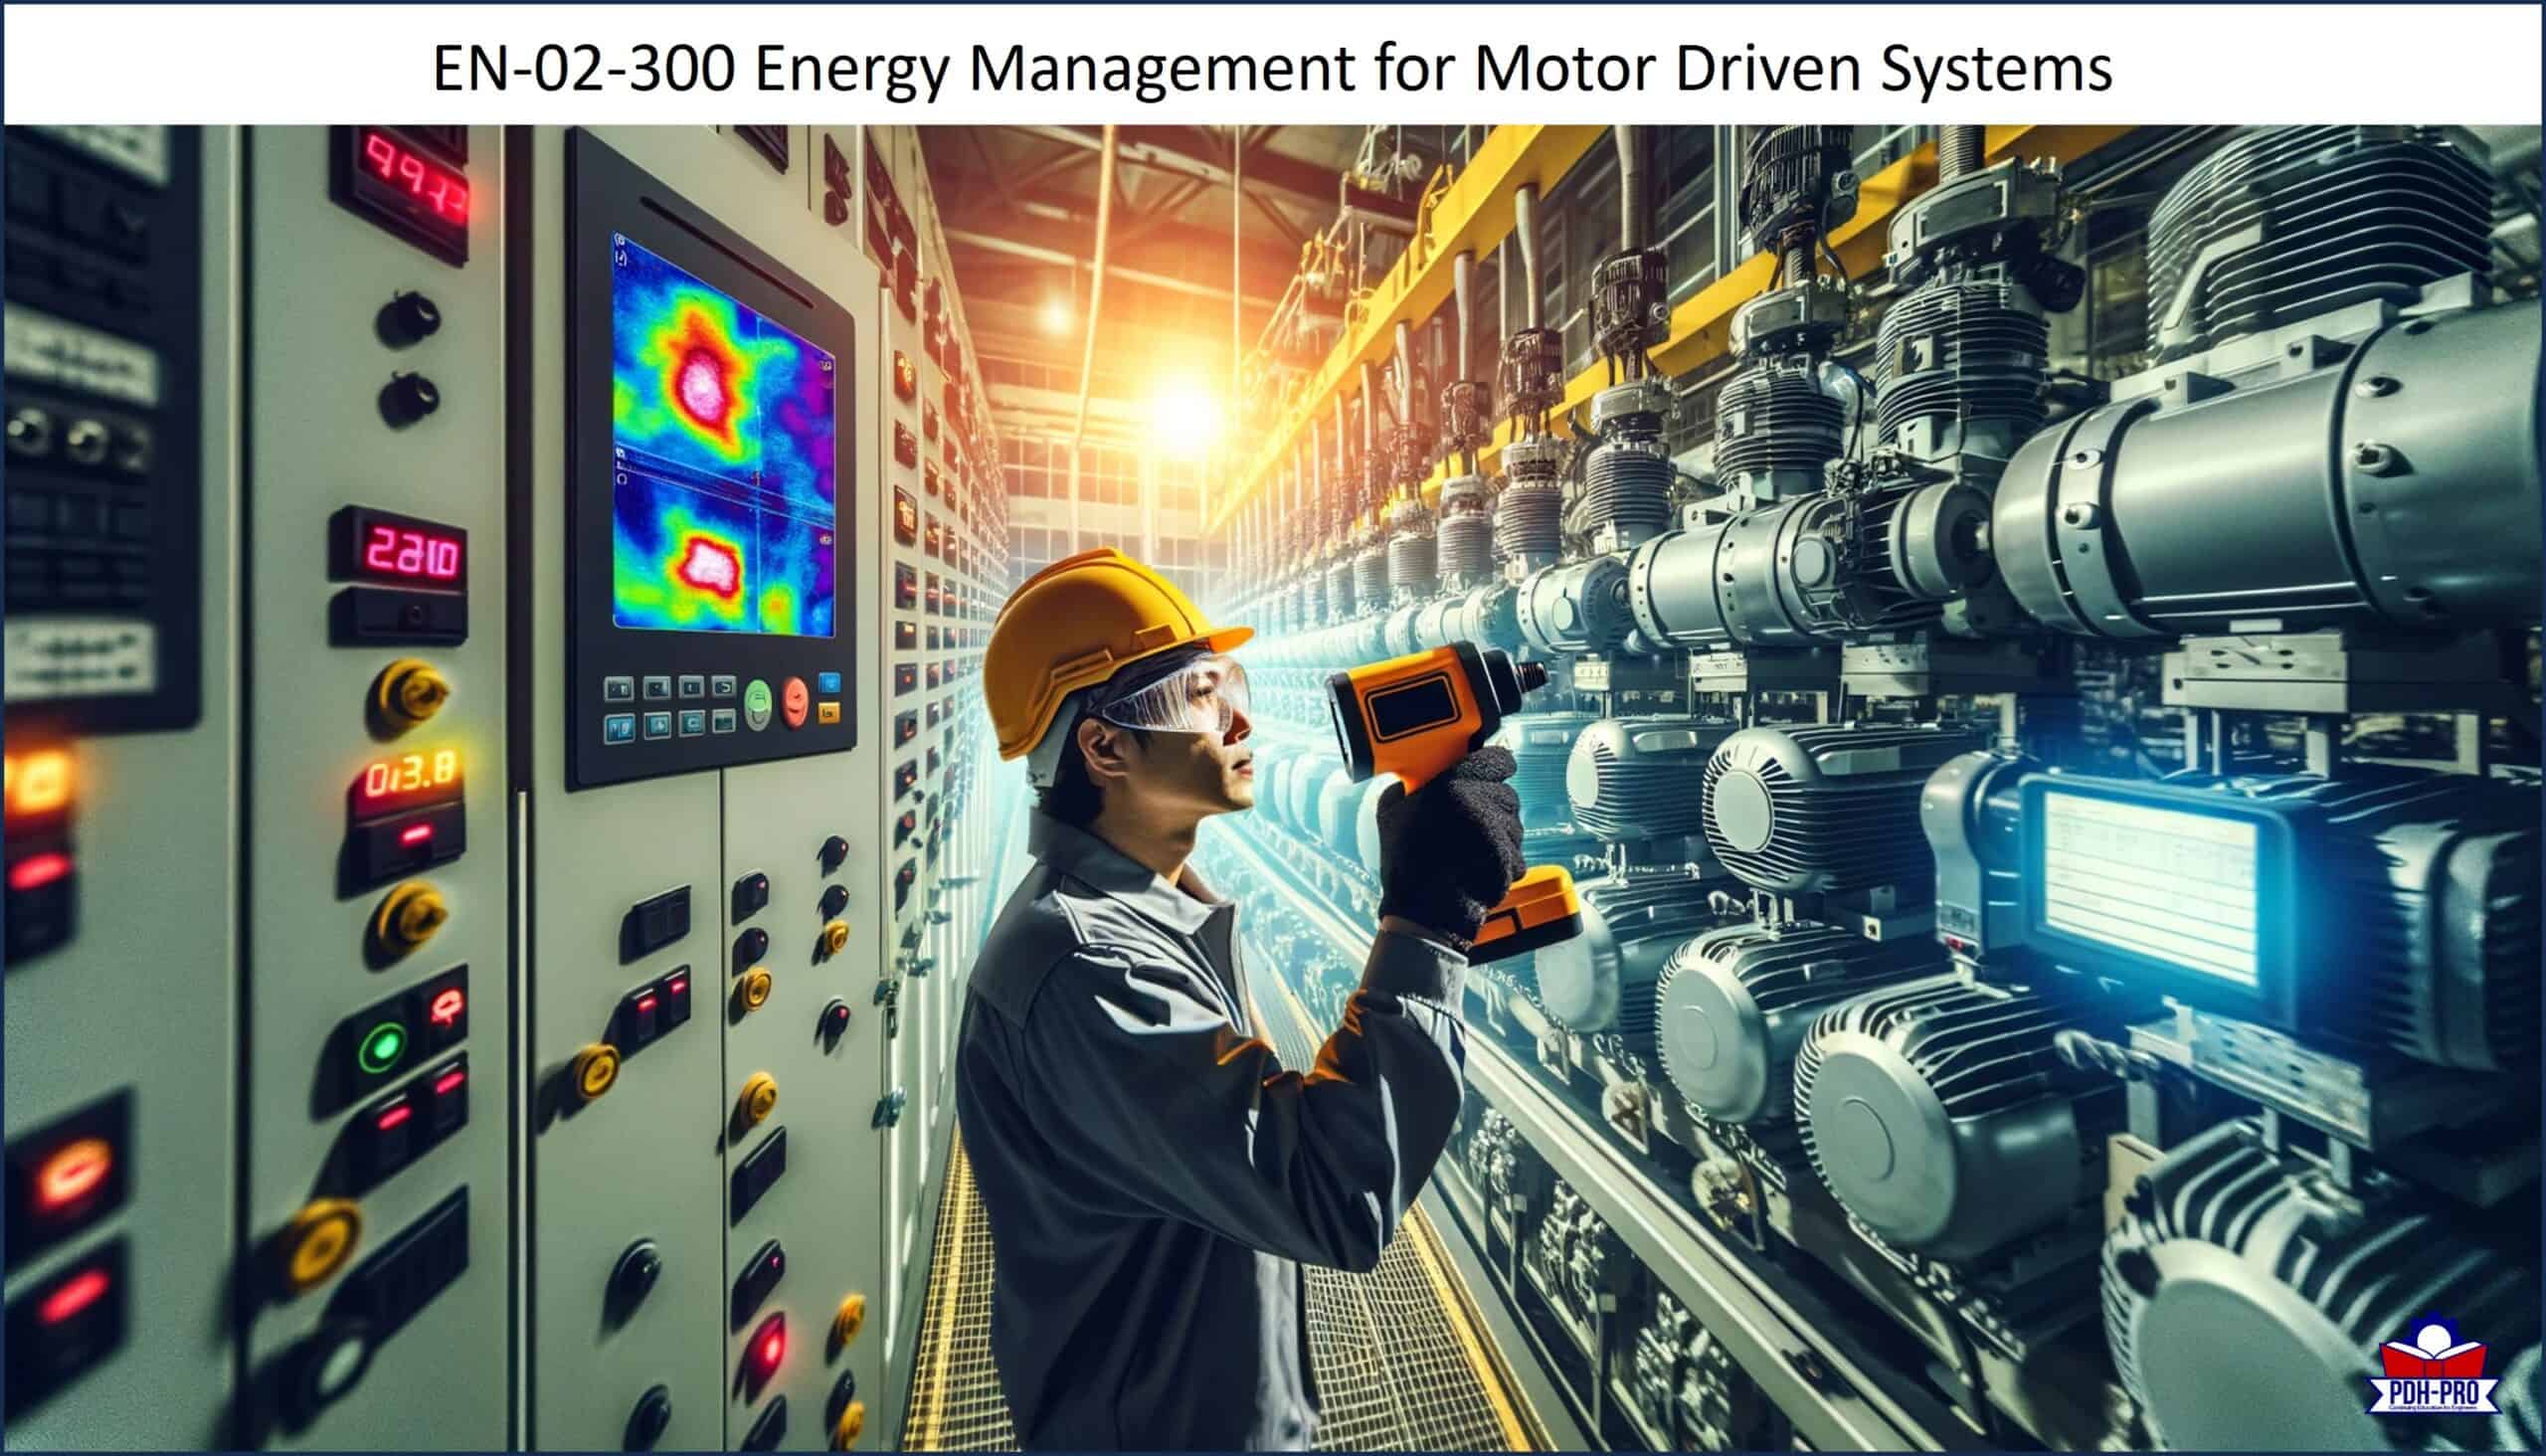 Energy Management for Motor Driven Systems